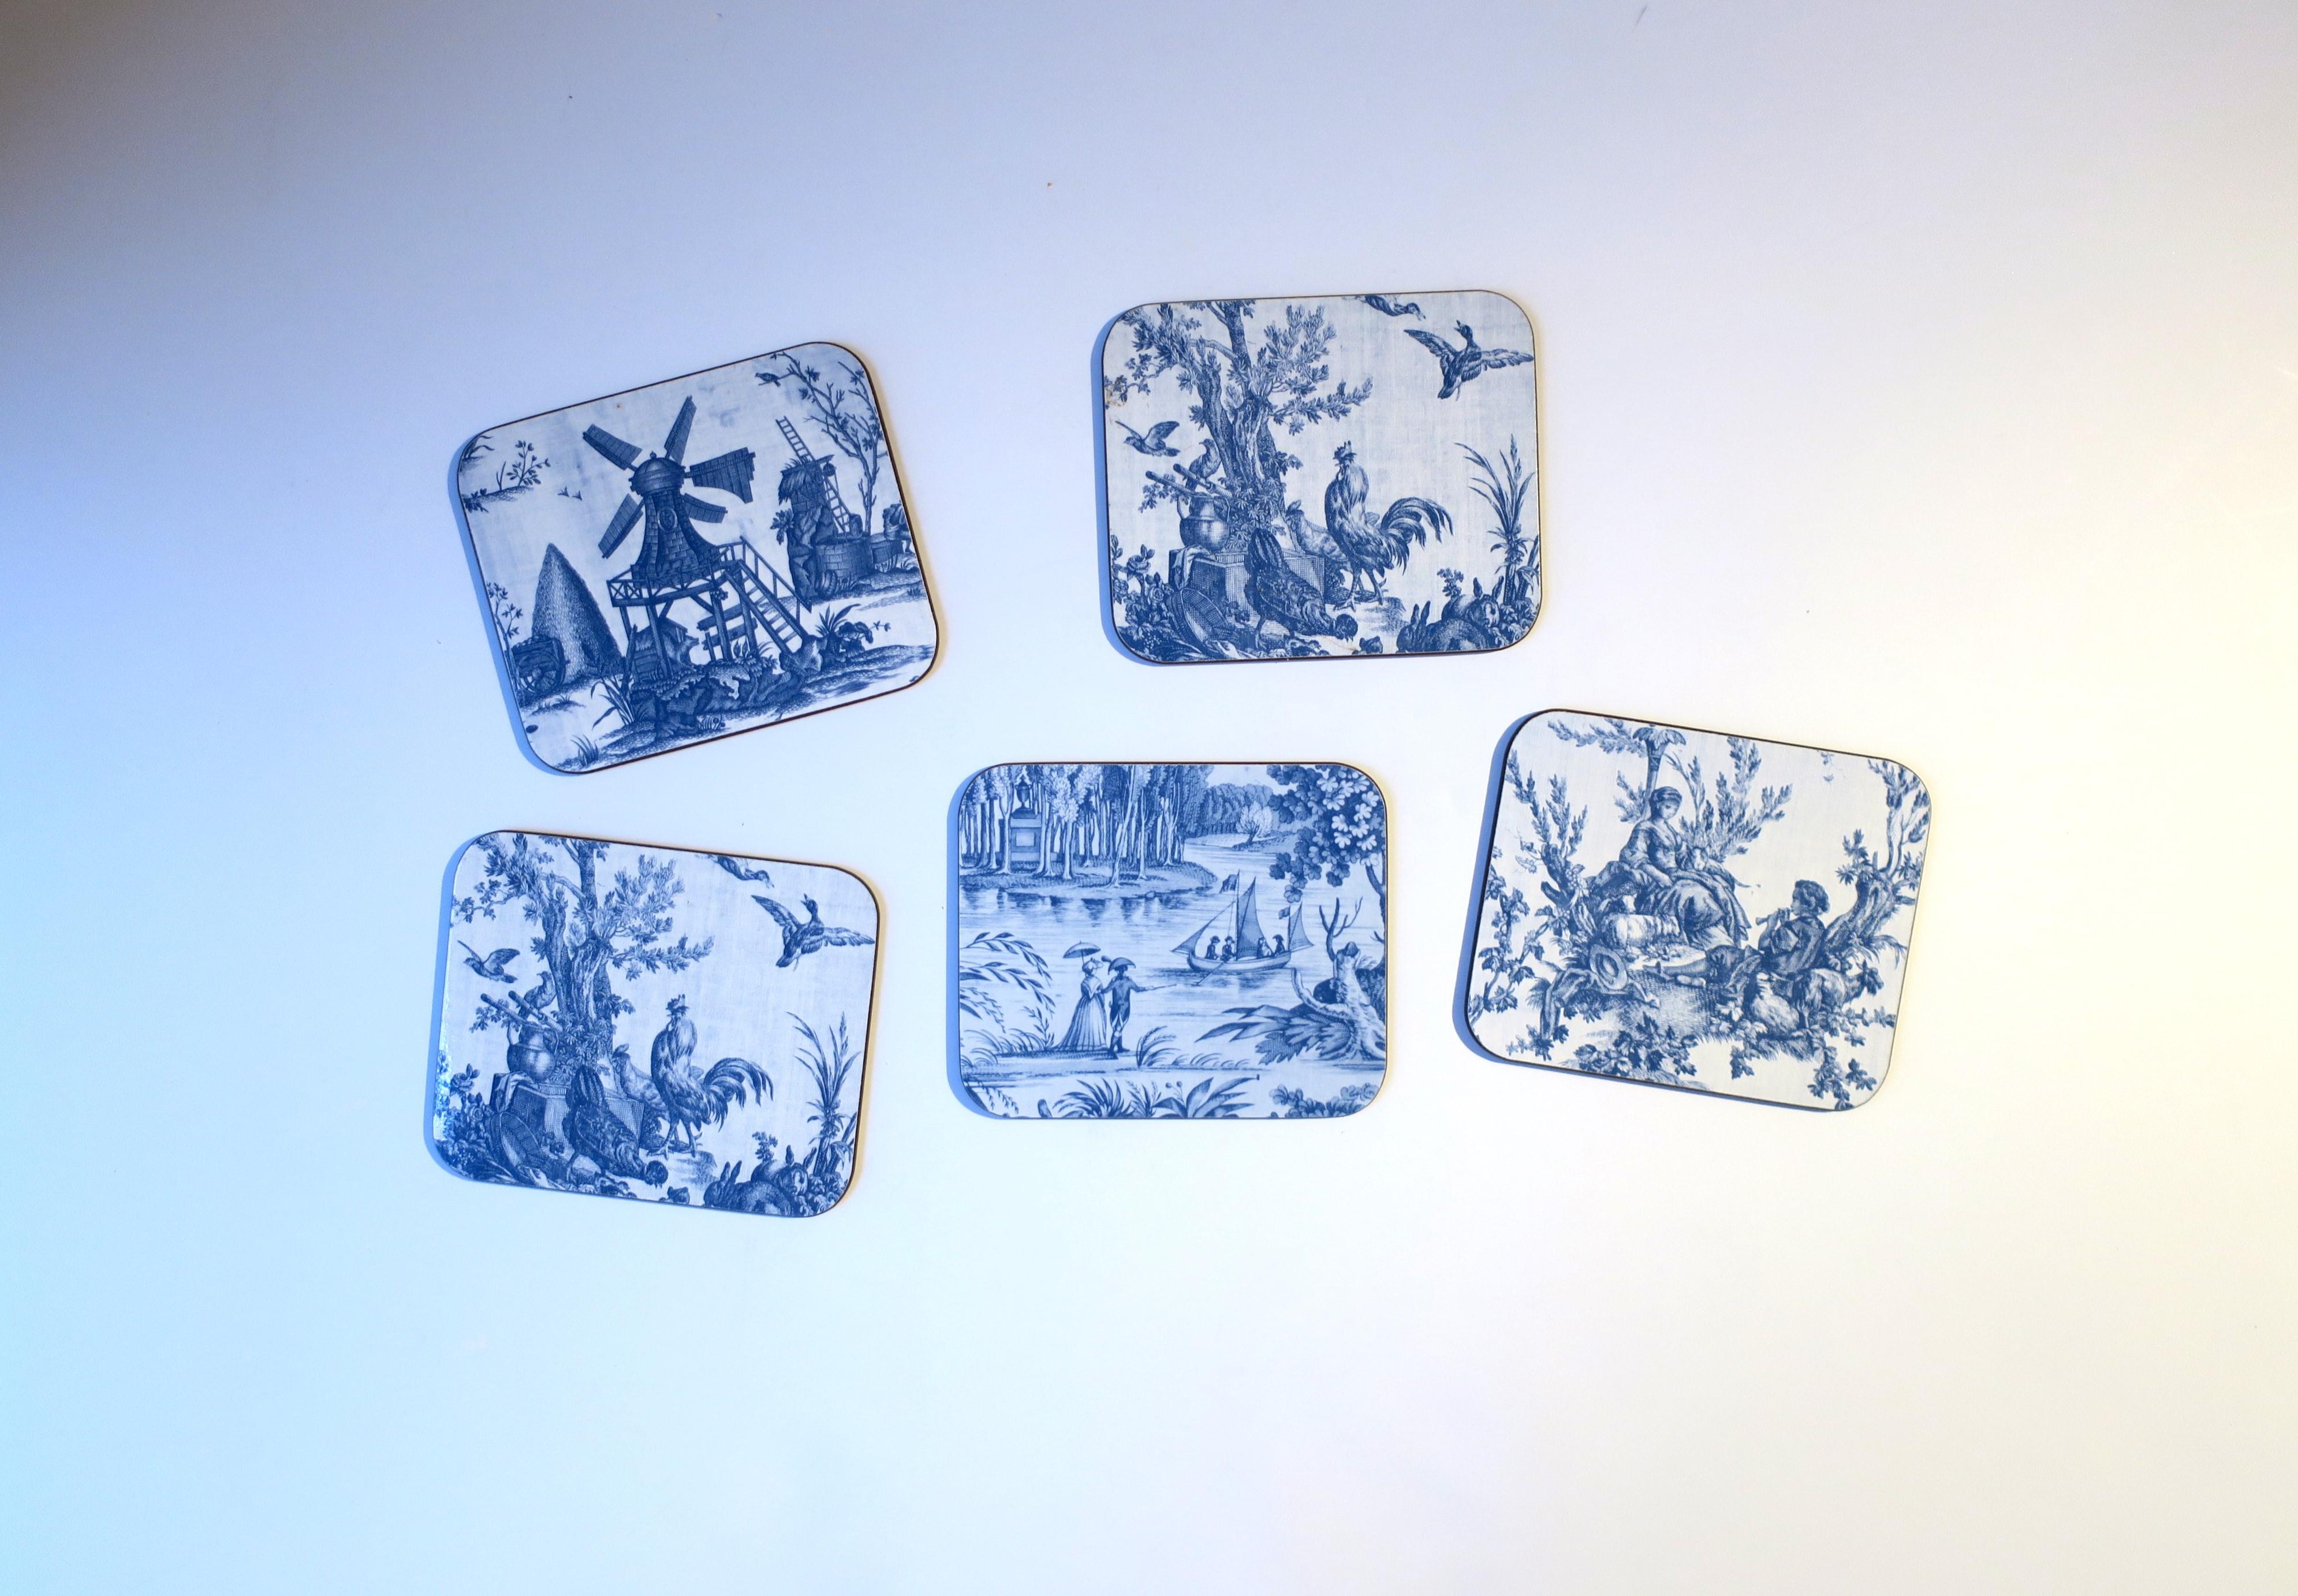 A set of five (5) blue and white French Toile scene cocktail drinks coasters, circa late-20th century. A great set and a necessity for protecting furniture tops. Dimensions: 3.75